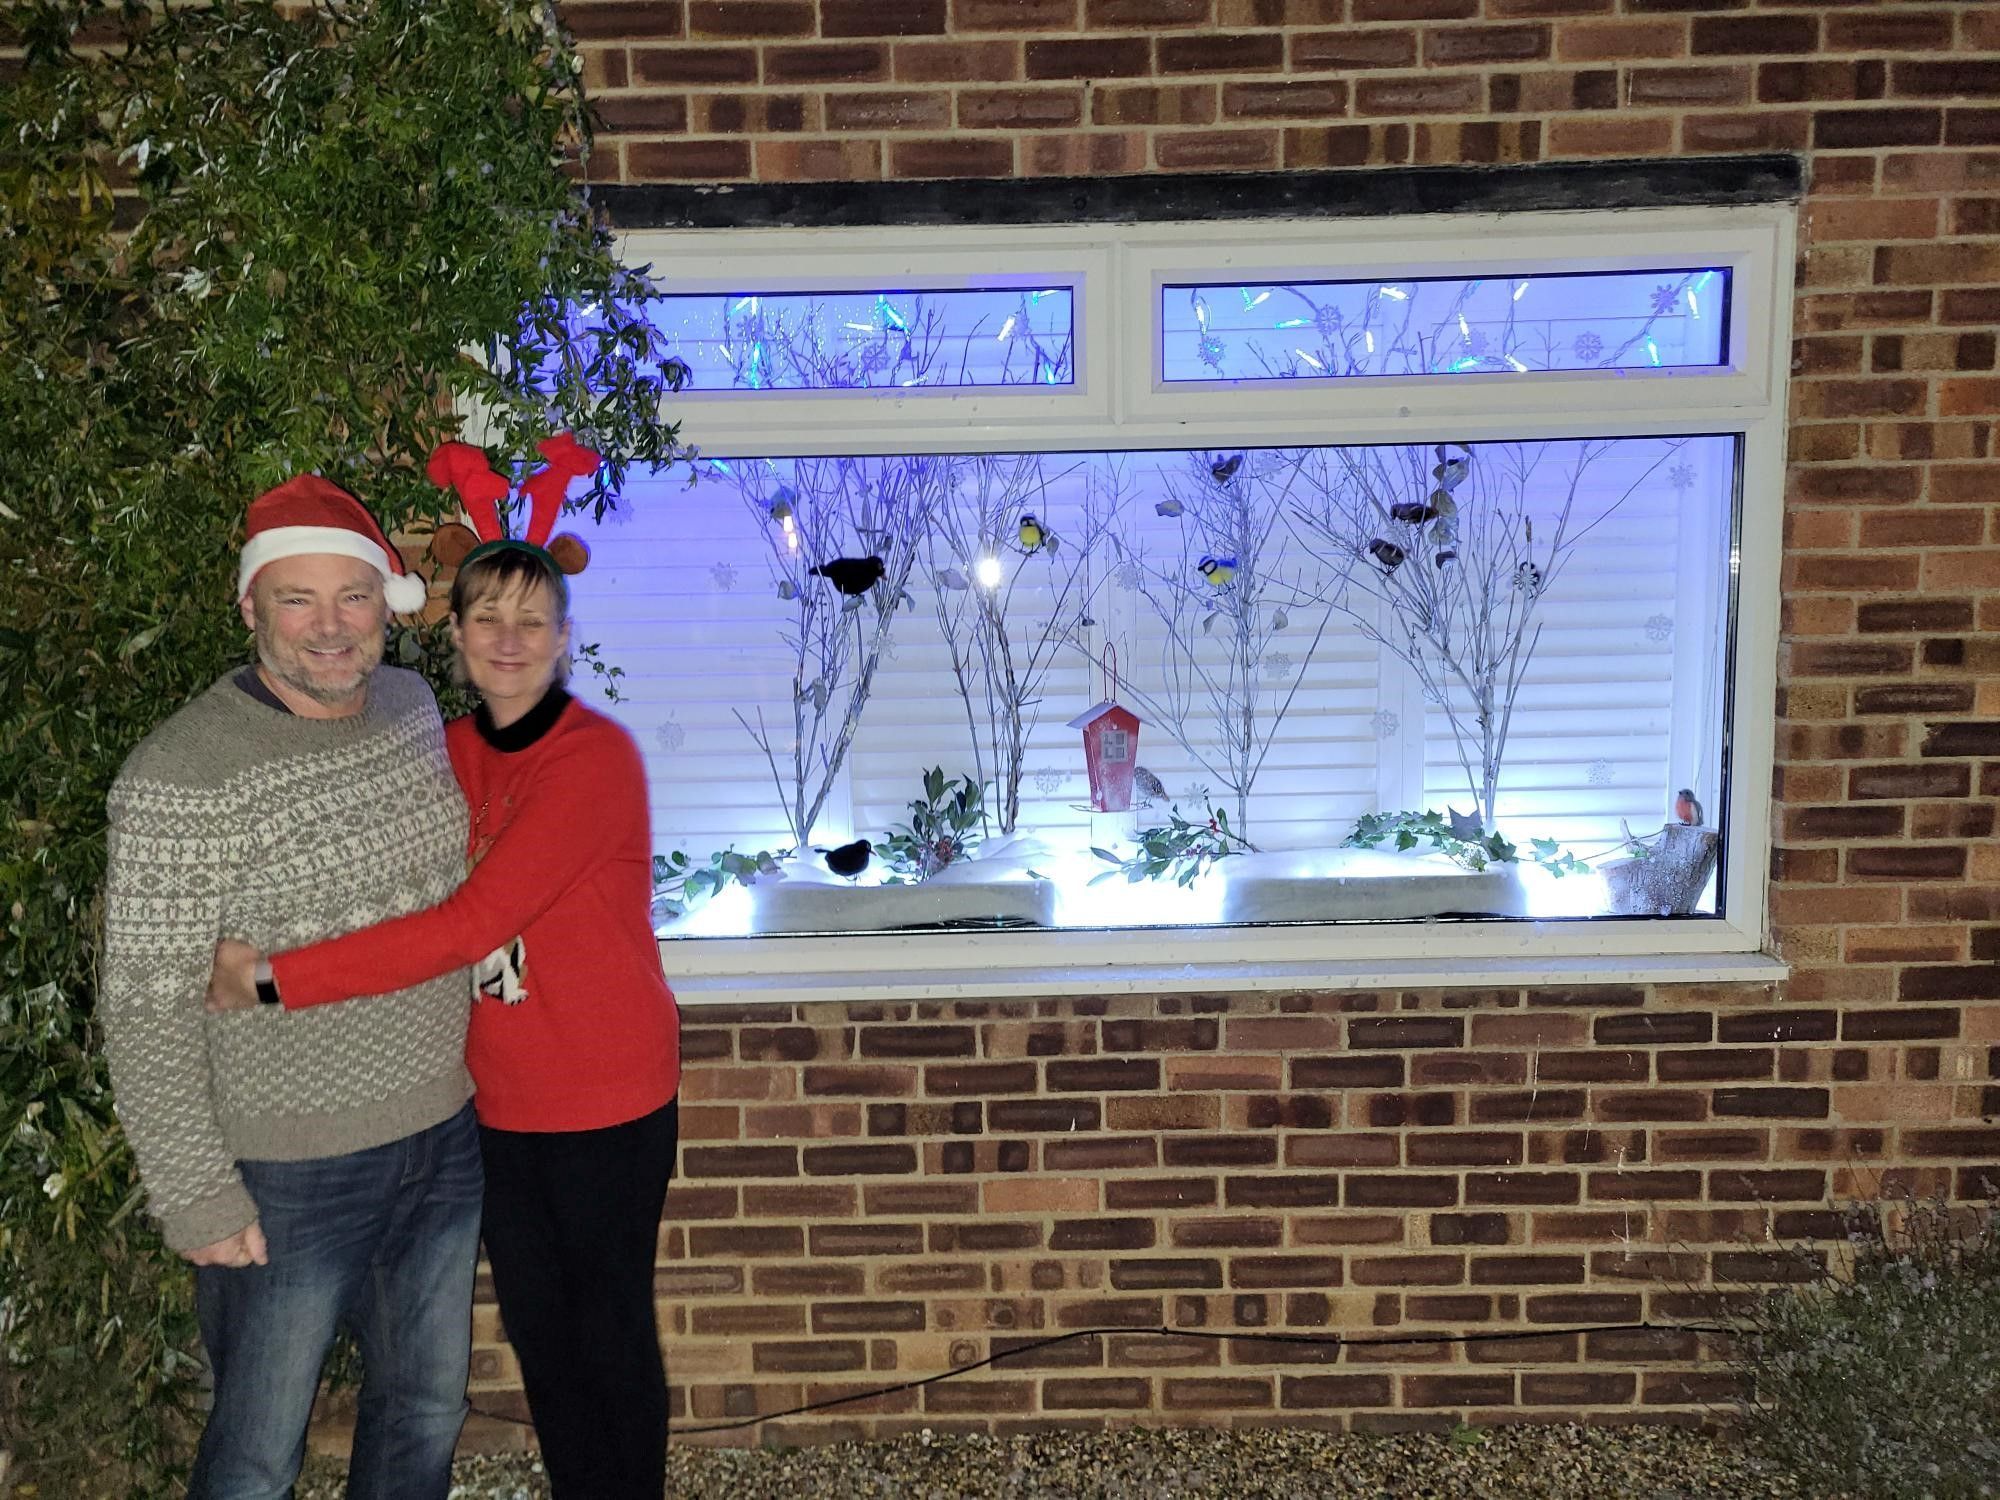 Angie and her partner are wearing Christmas jumpers and standing outside their advent window, which shows winter trees and birds.